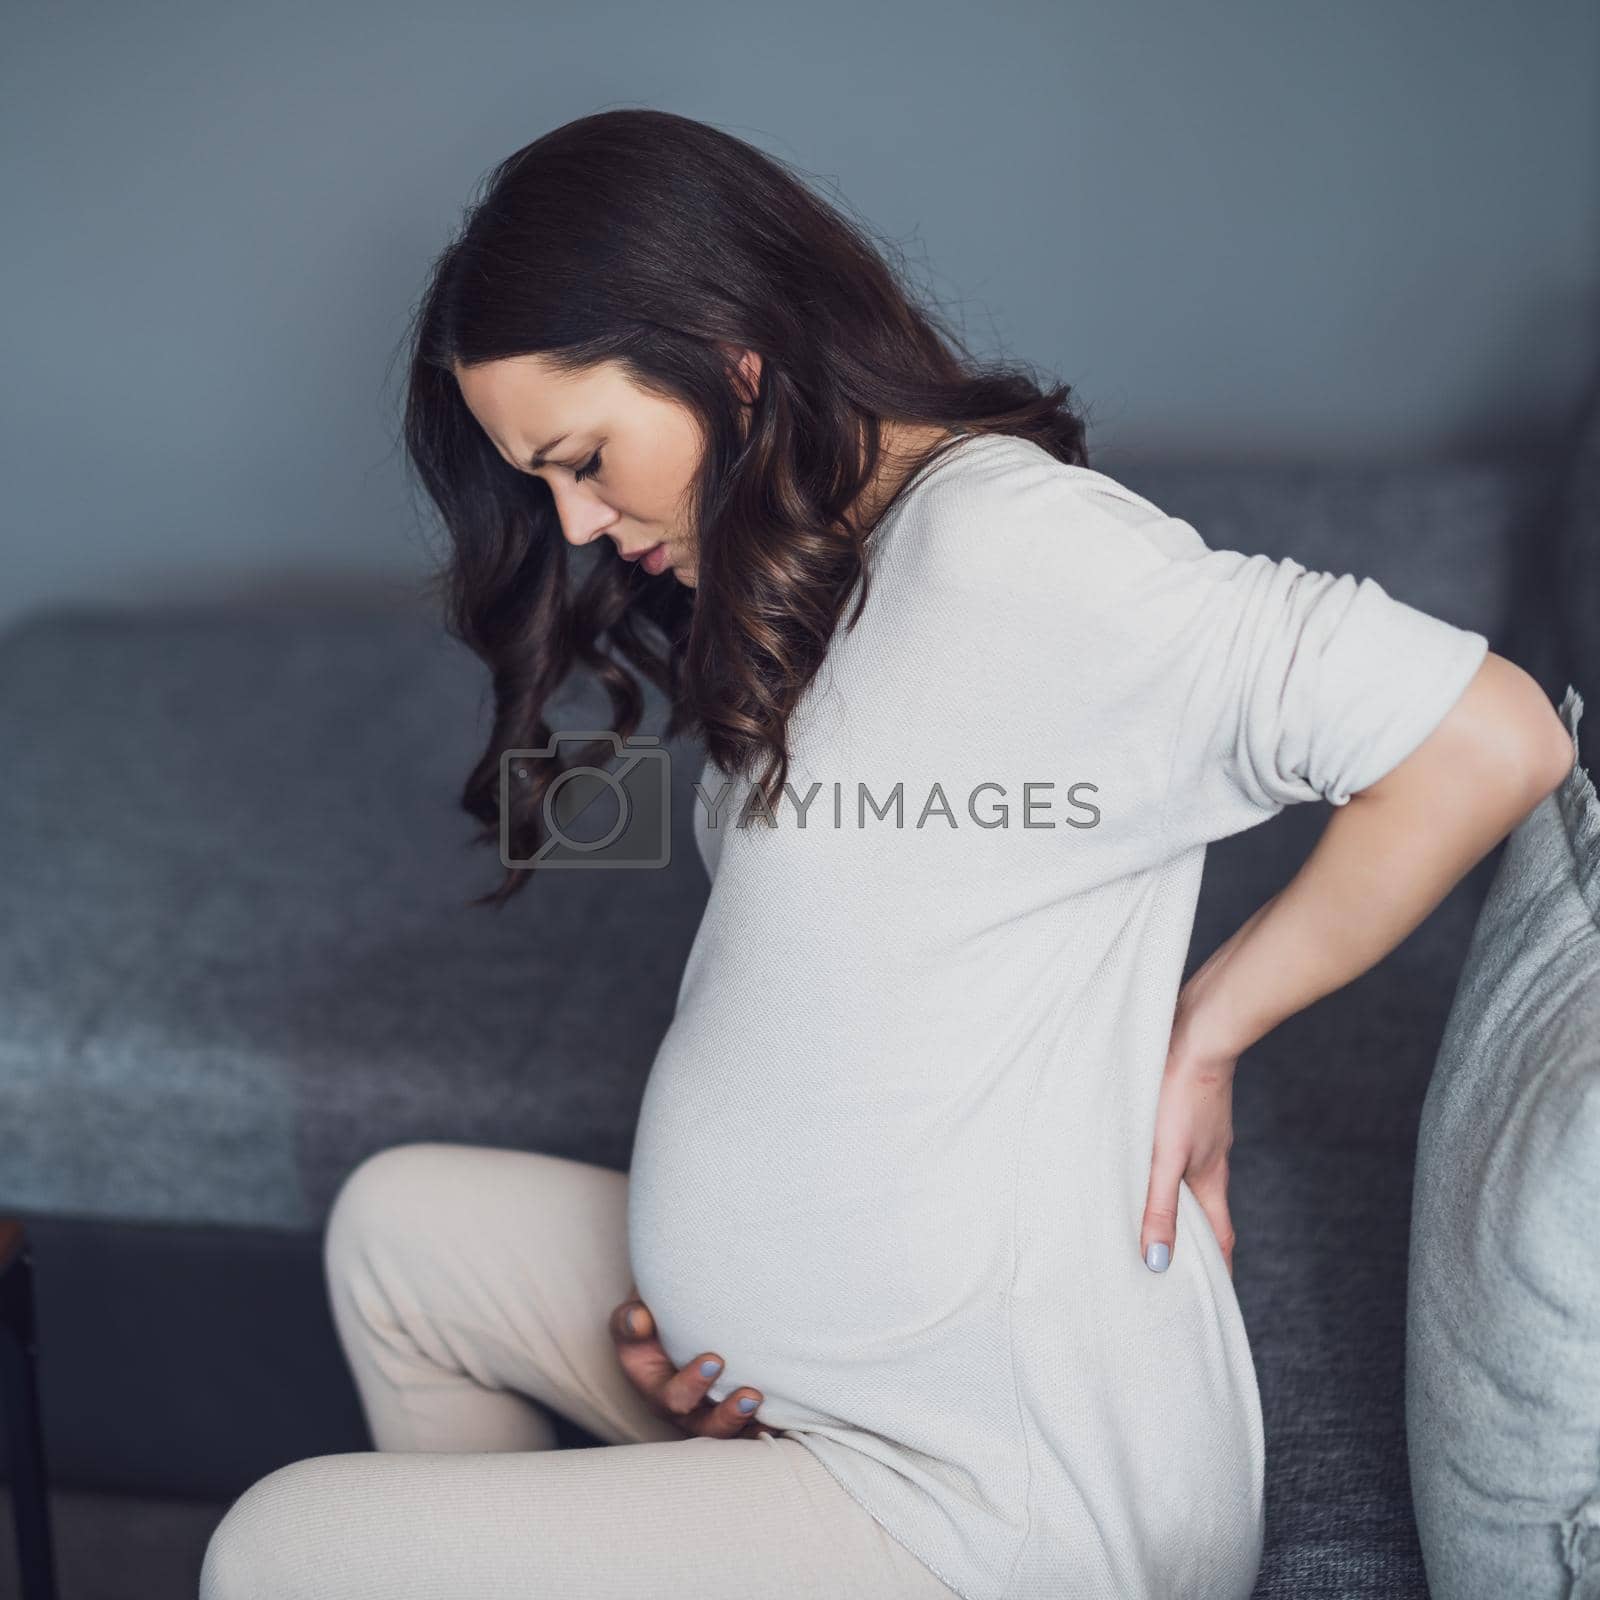 Royalty free image of Pregnancy by djoronimo